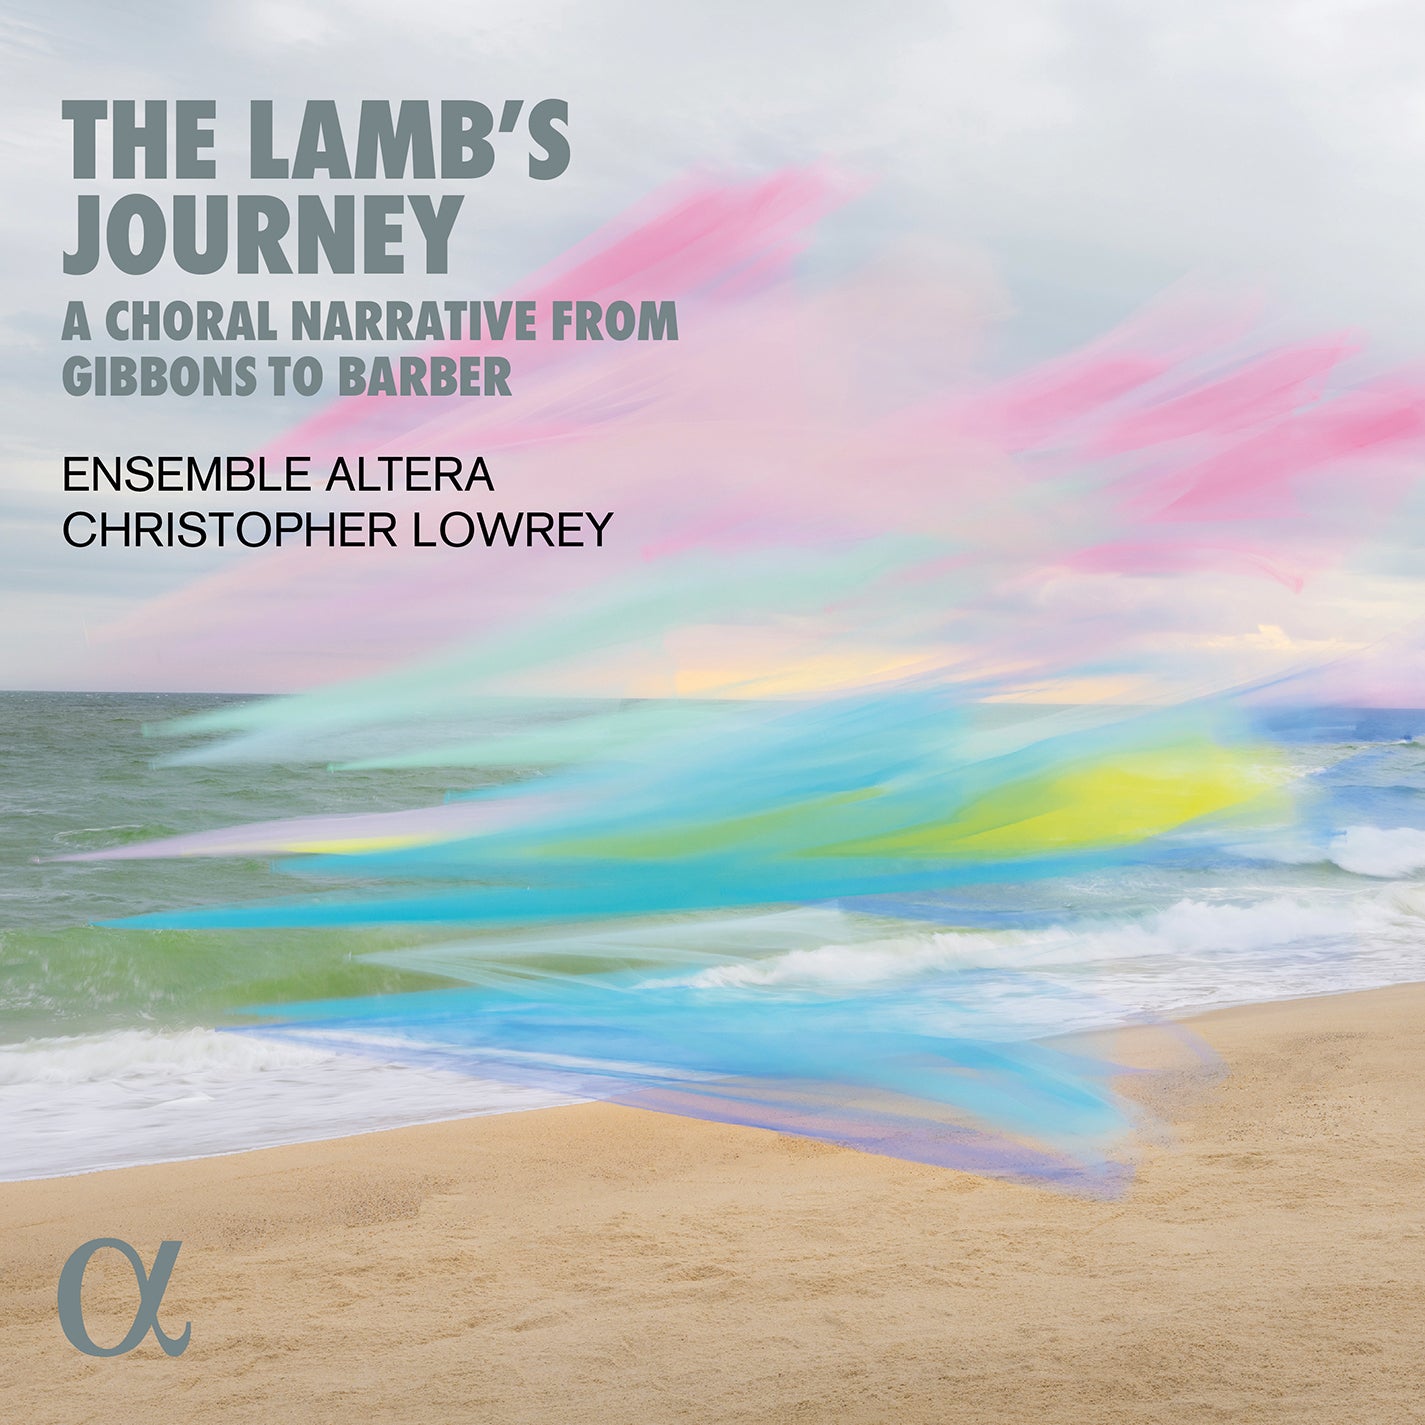 The Lamb's Journey - A Choral Narrative from Gibbons to Barber / Altera, Lowrey